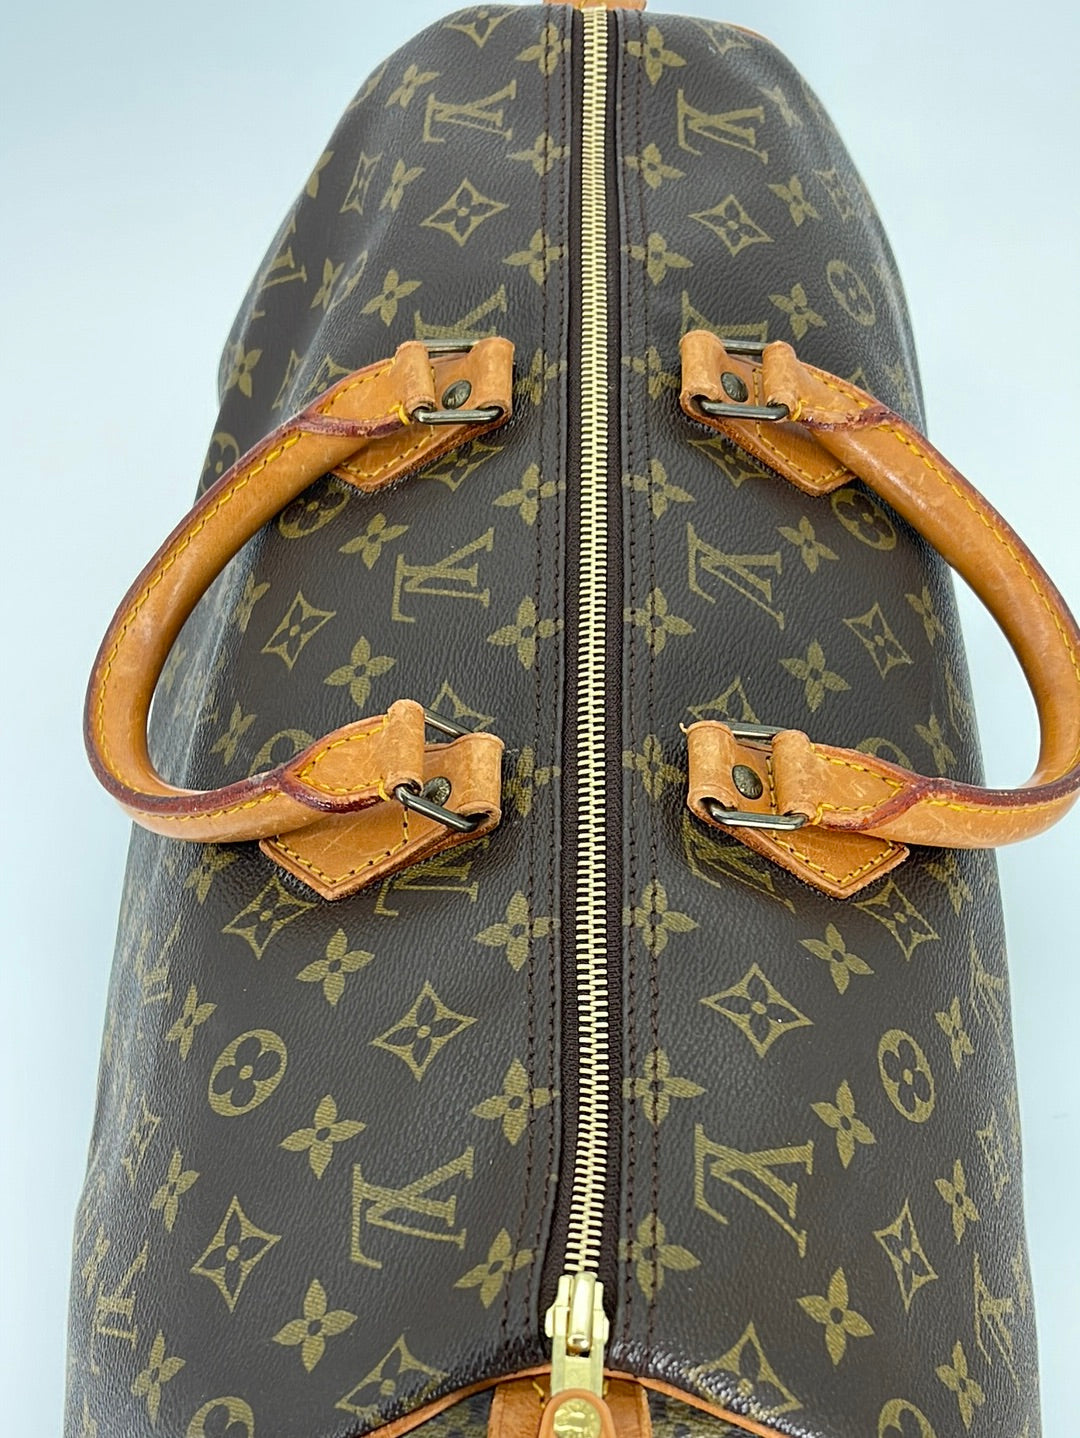 New arrival! Previously owned Louis Vuitton speedy 40 Some wear